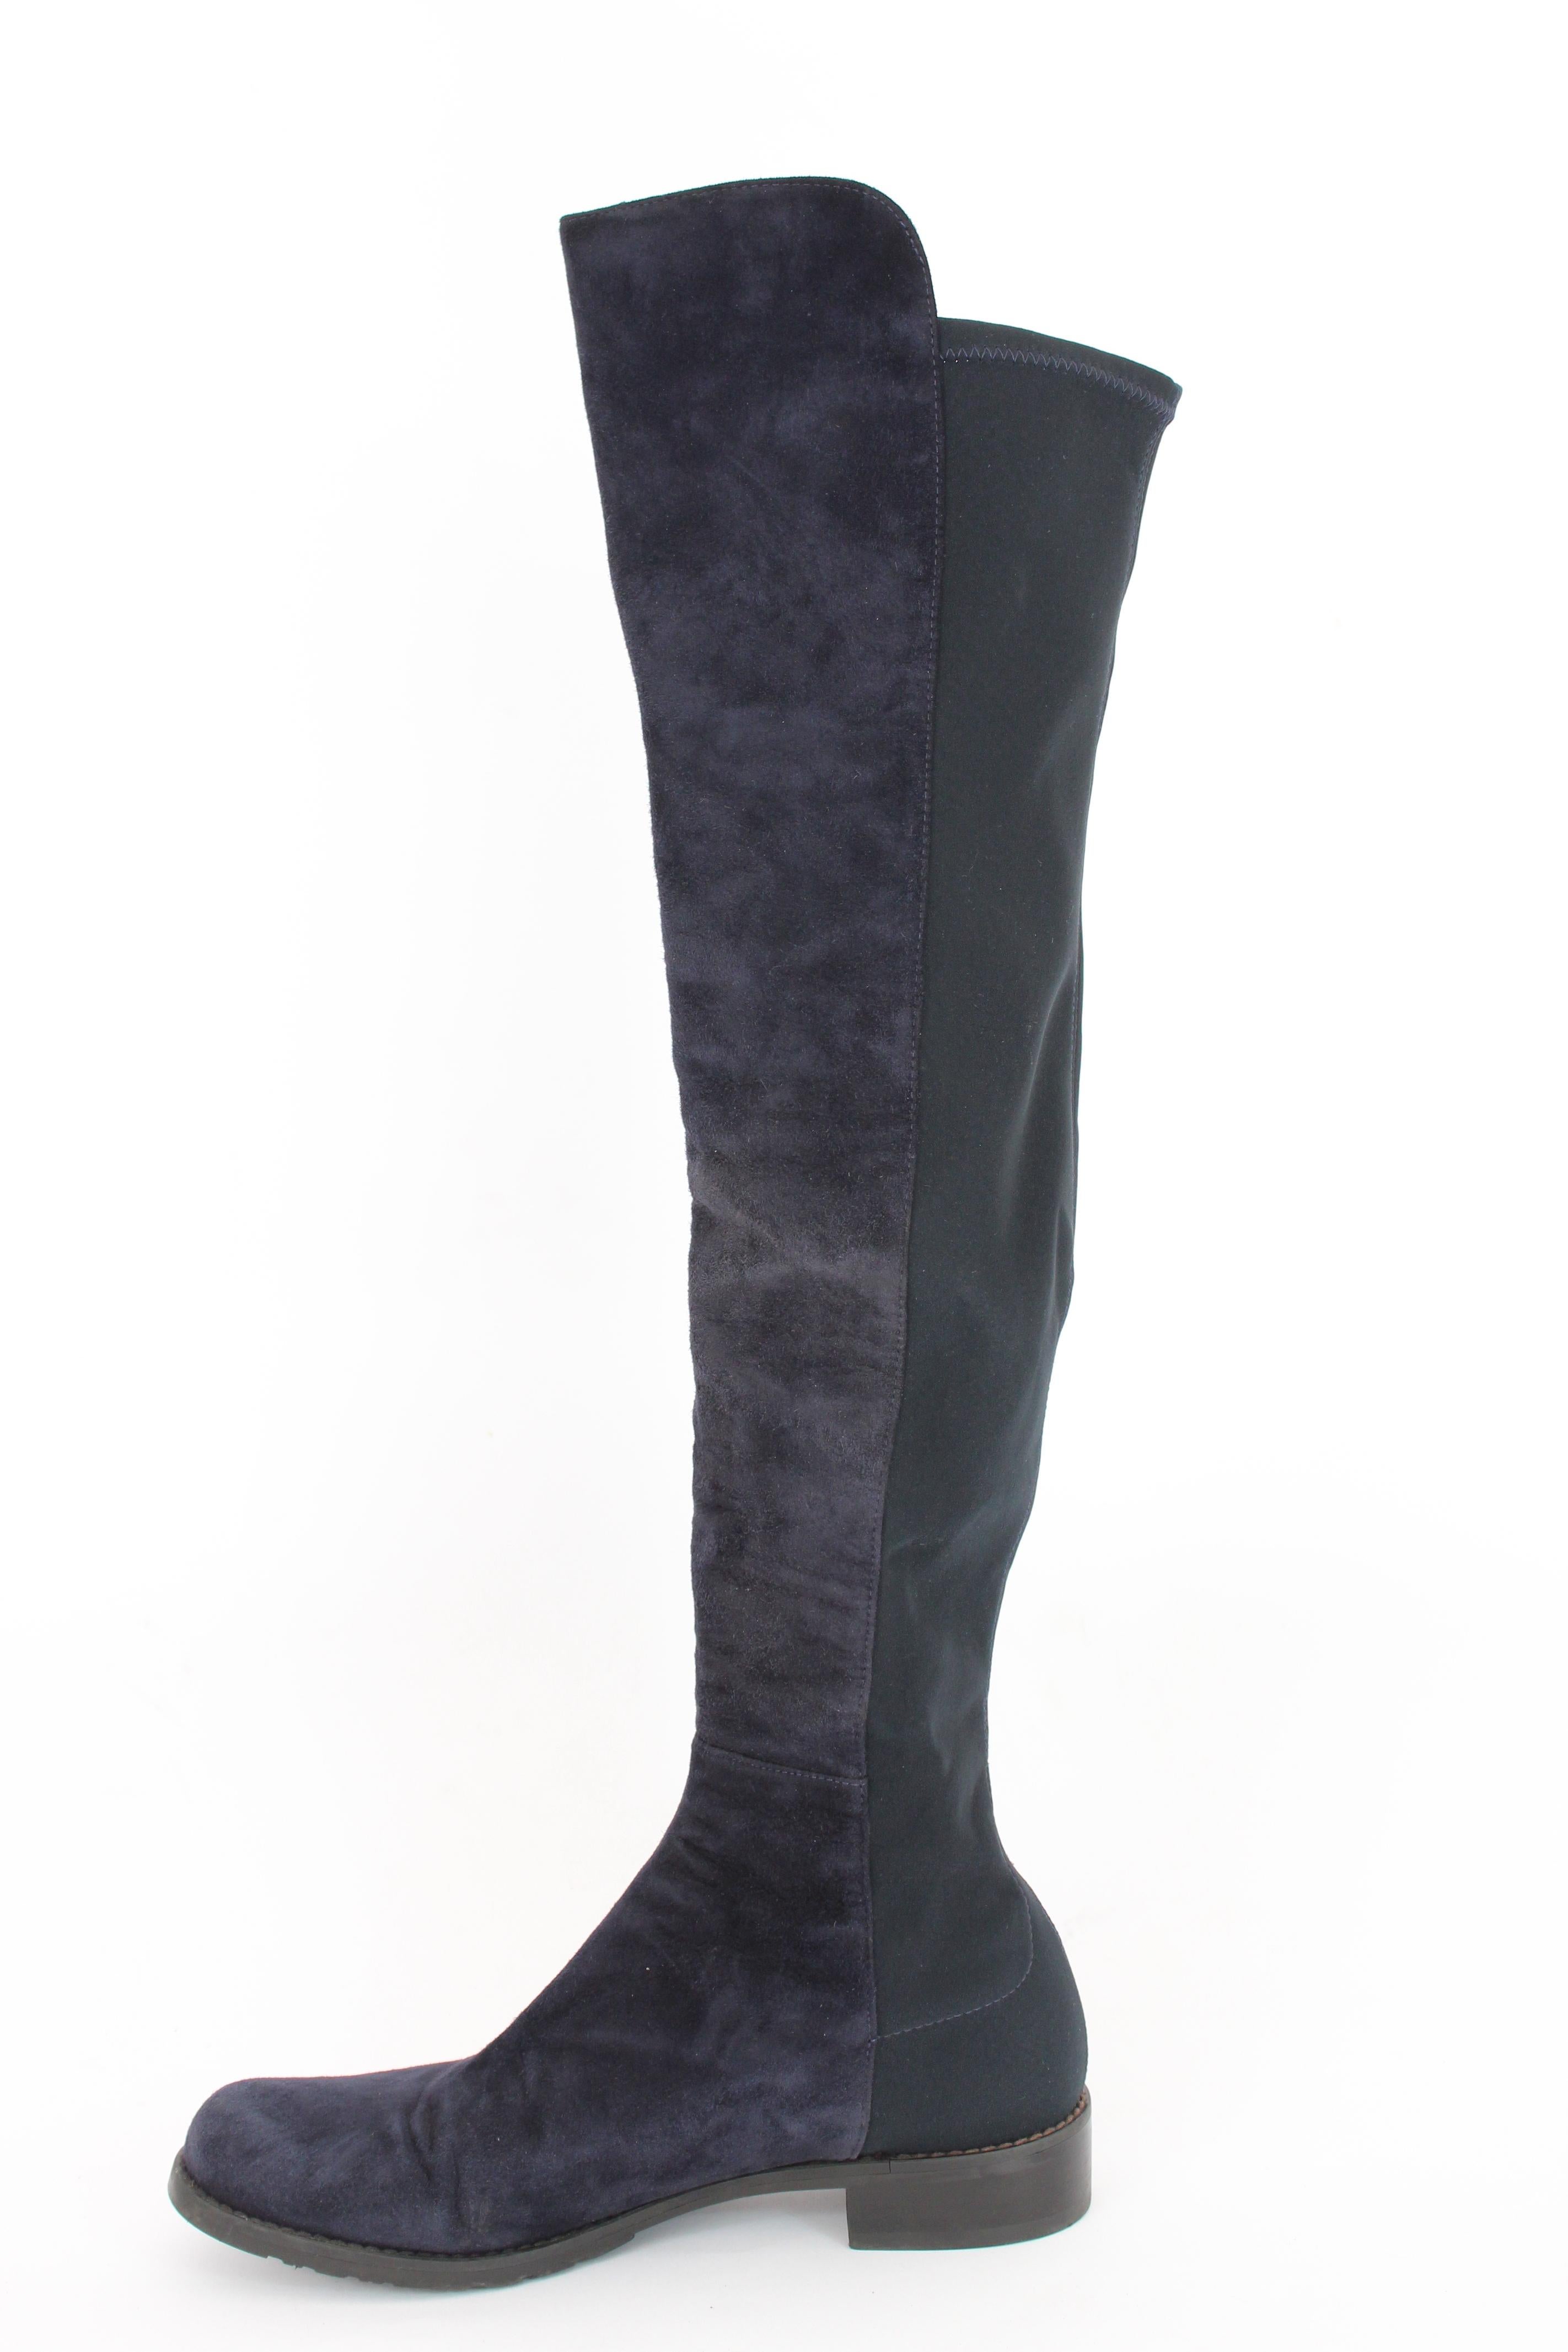 Stuart Weitzman boots in blue suede leather, reserve model. Knee-high with rubber sole. Like new conditions. 

Size: (Sole 10.4